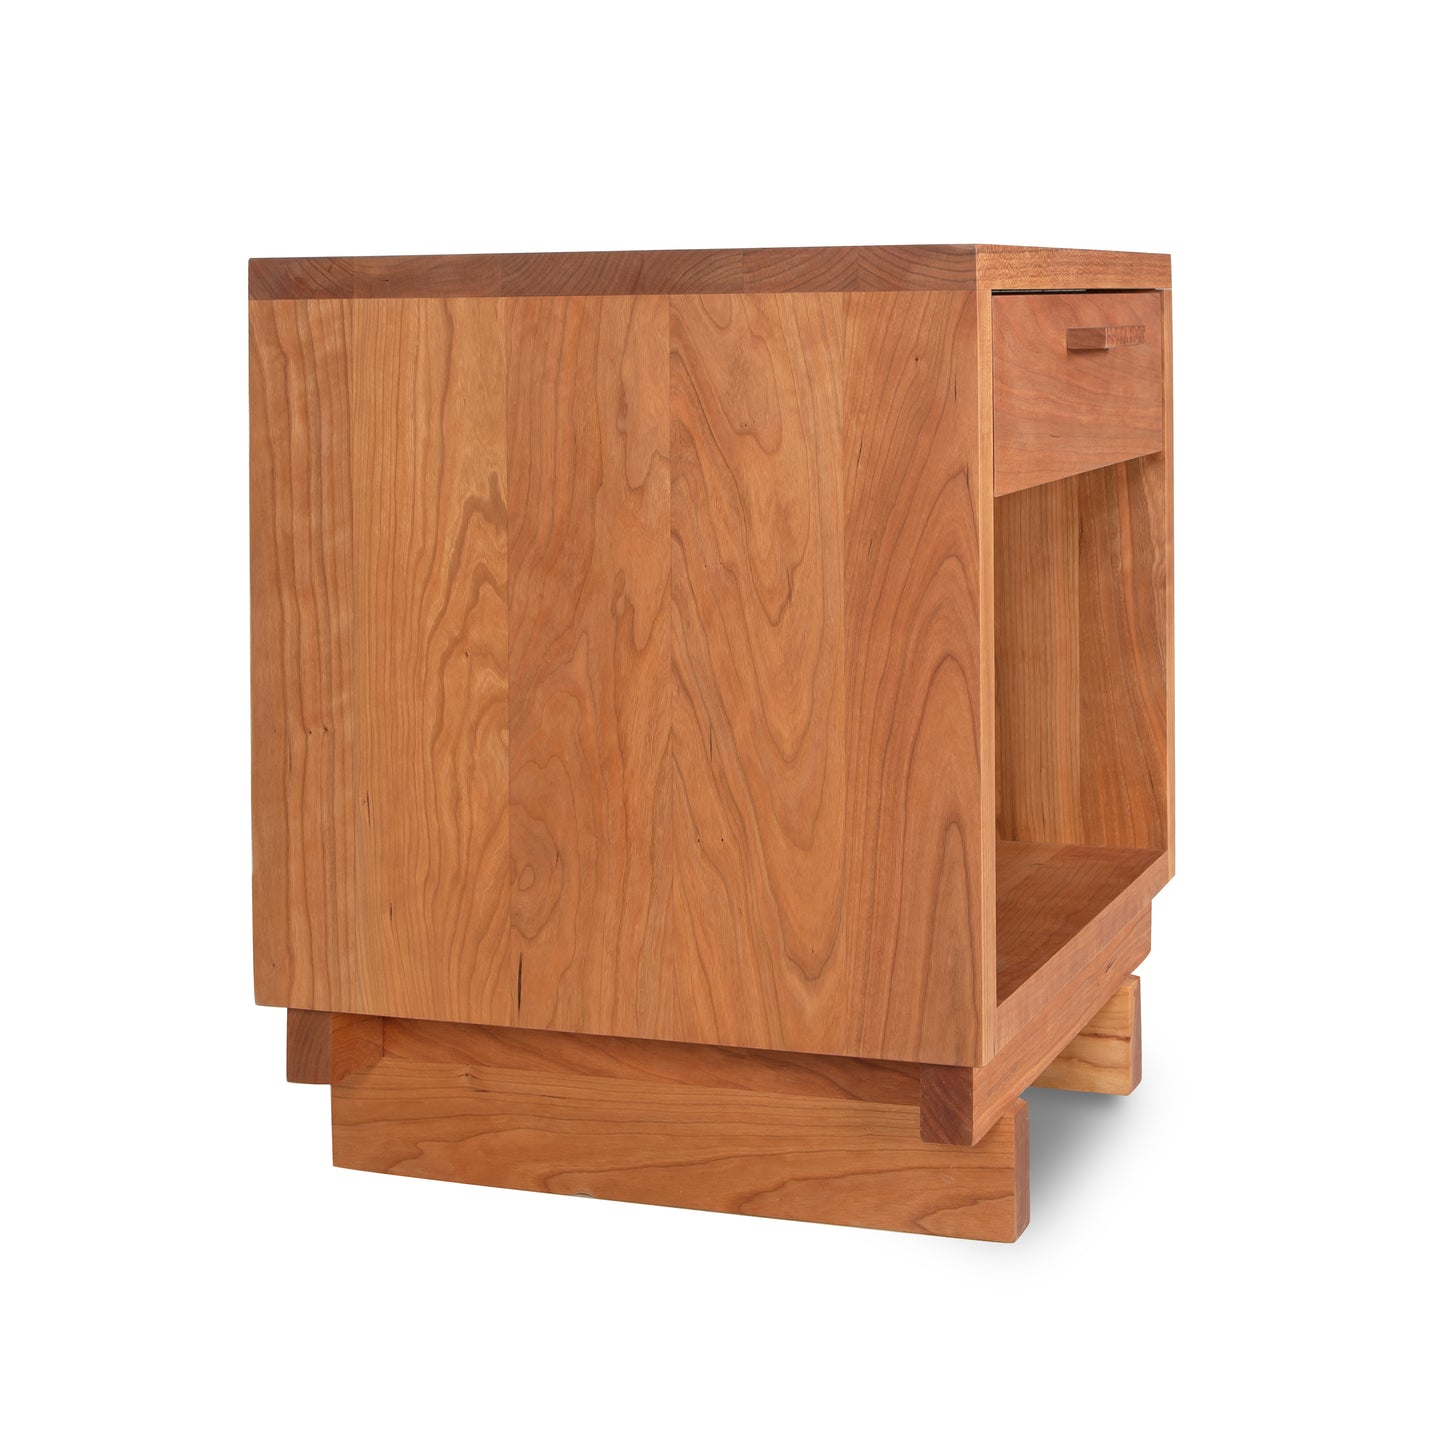 Custom Loft 1-Drawer Enclosed Shelf Nightstand by Vermont Furniture Designs with an open shelf and a closed drawer on a white background, featuring solid wood construction.